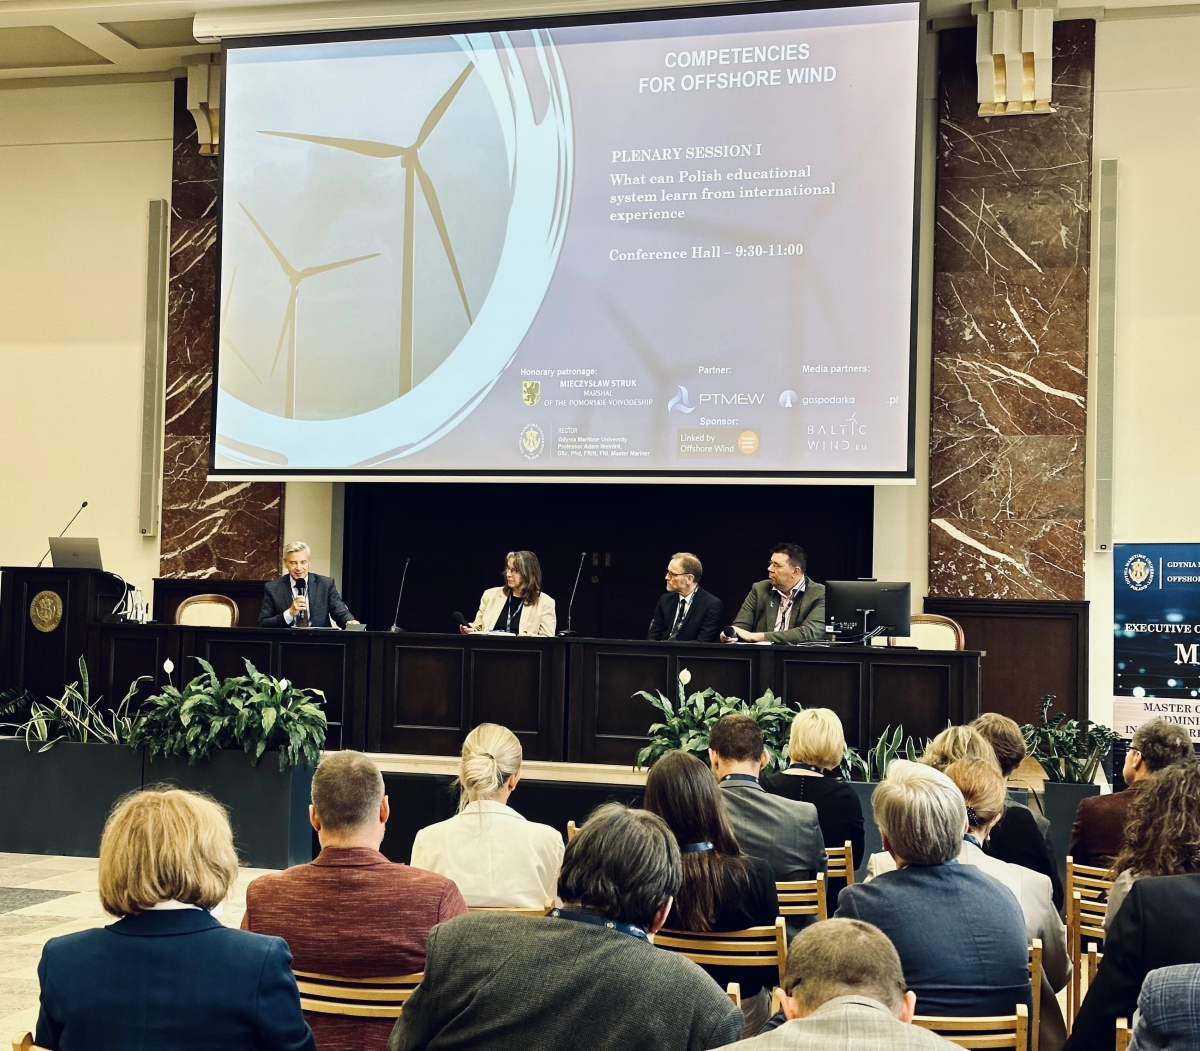 International Debate on Competencies for Offshore Wind at the Gdynia Maritime University - MarinePoland.com